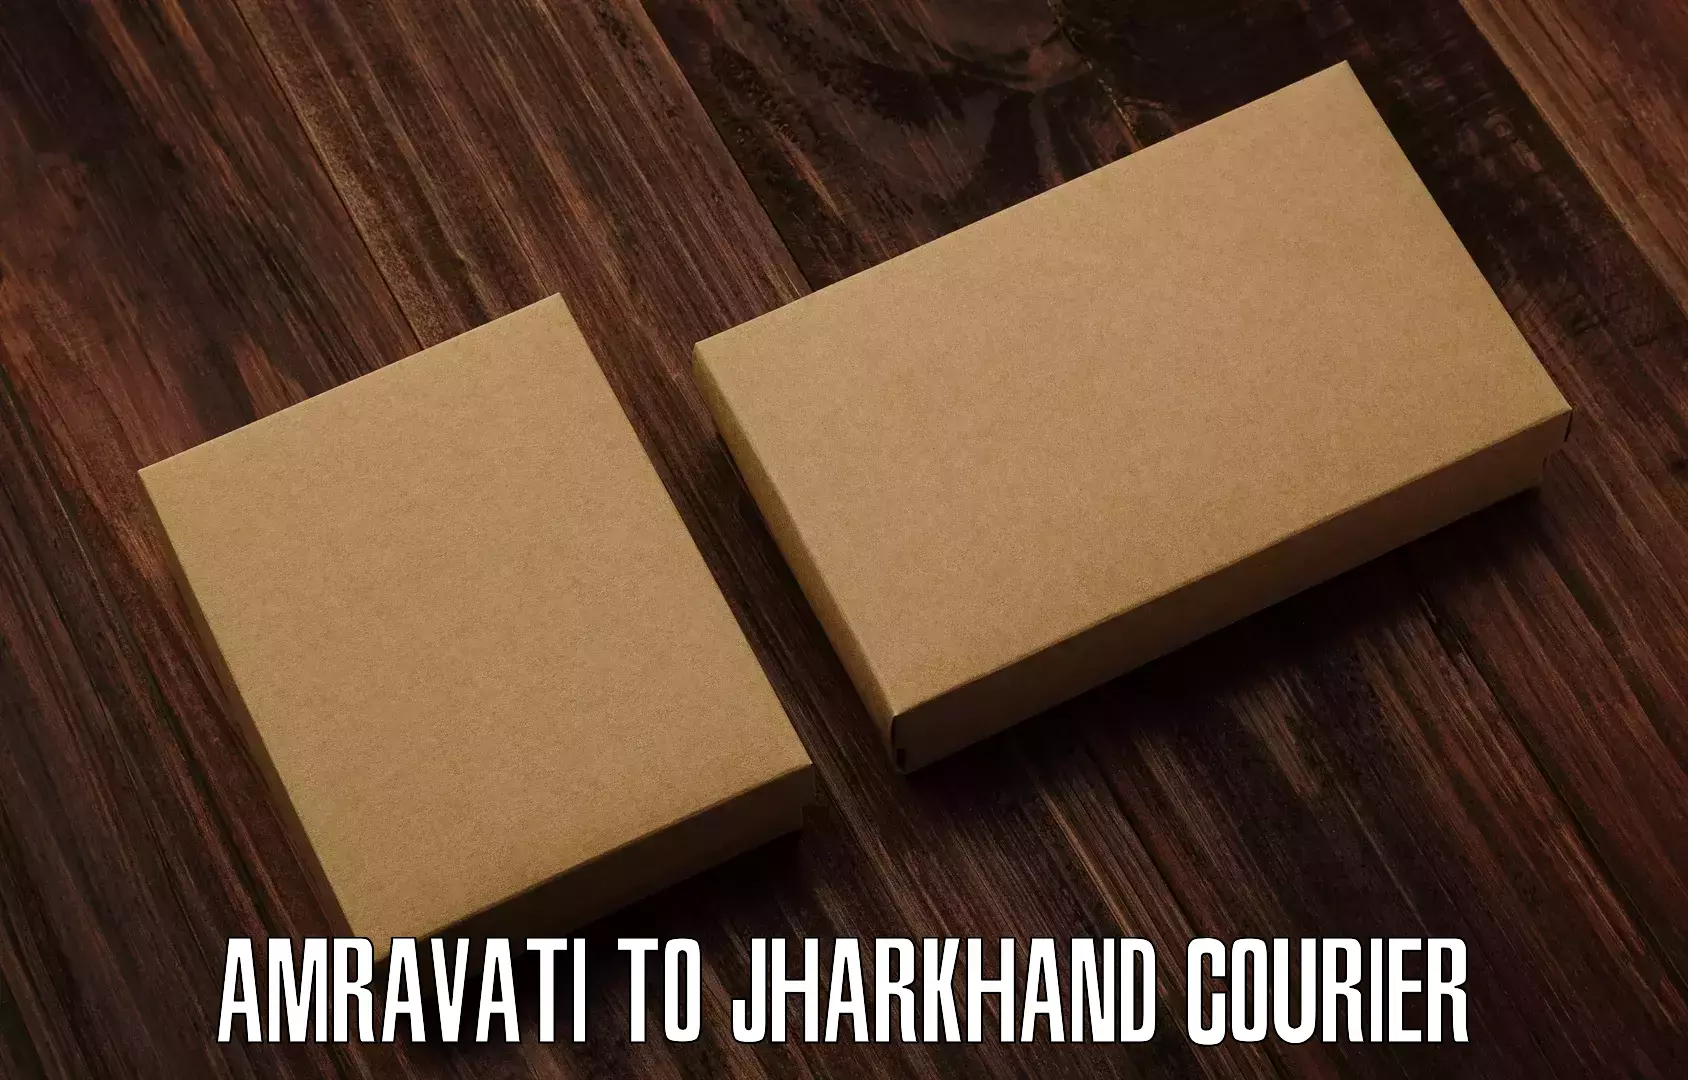 User-friendly delivery service Amravati to Jharkhand